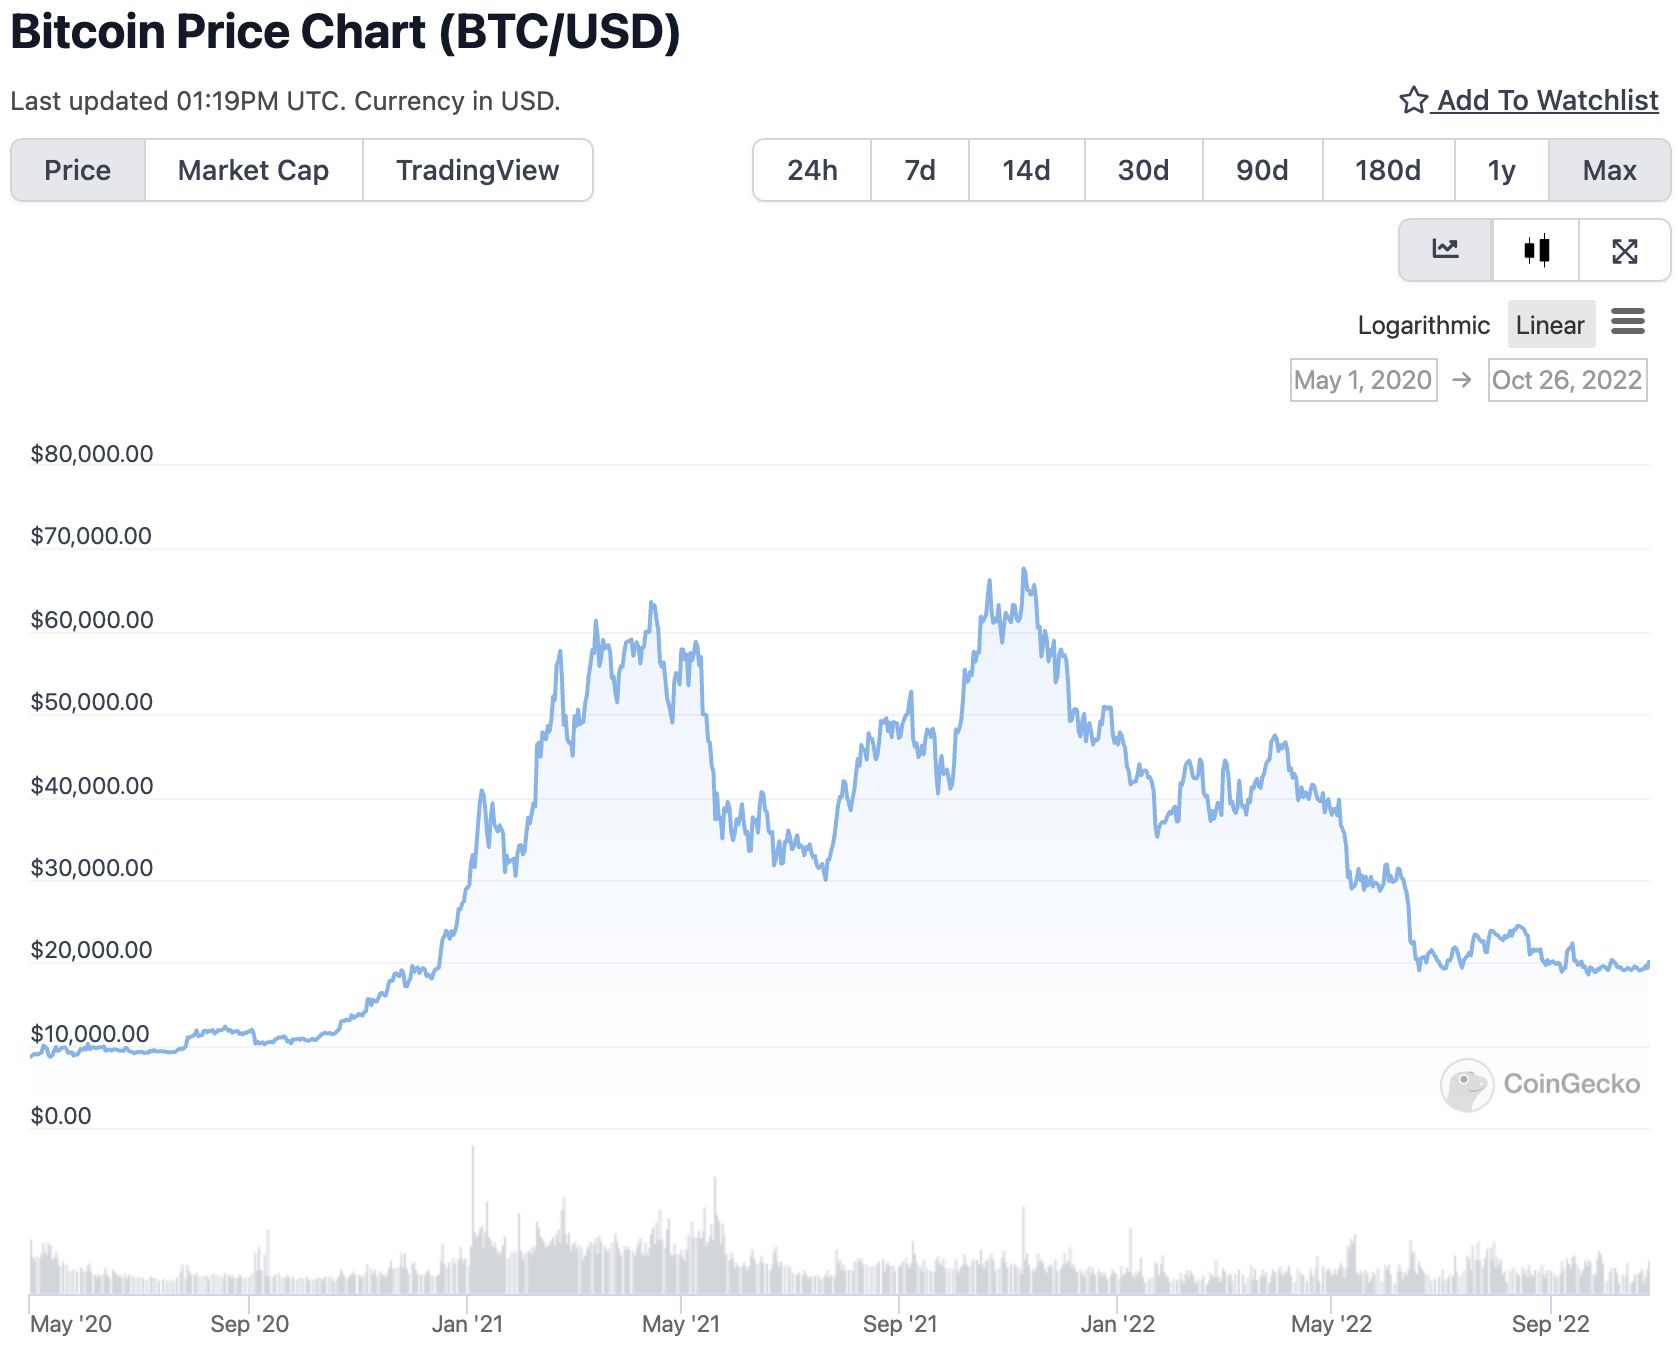 Bitcoin price chart covering periods 2020 to 2022